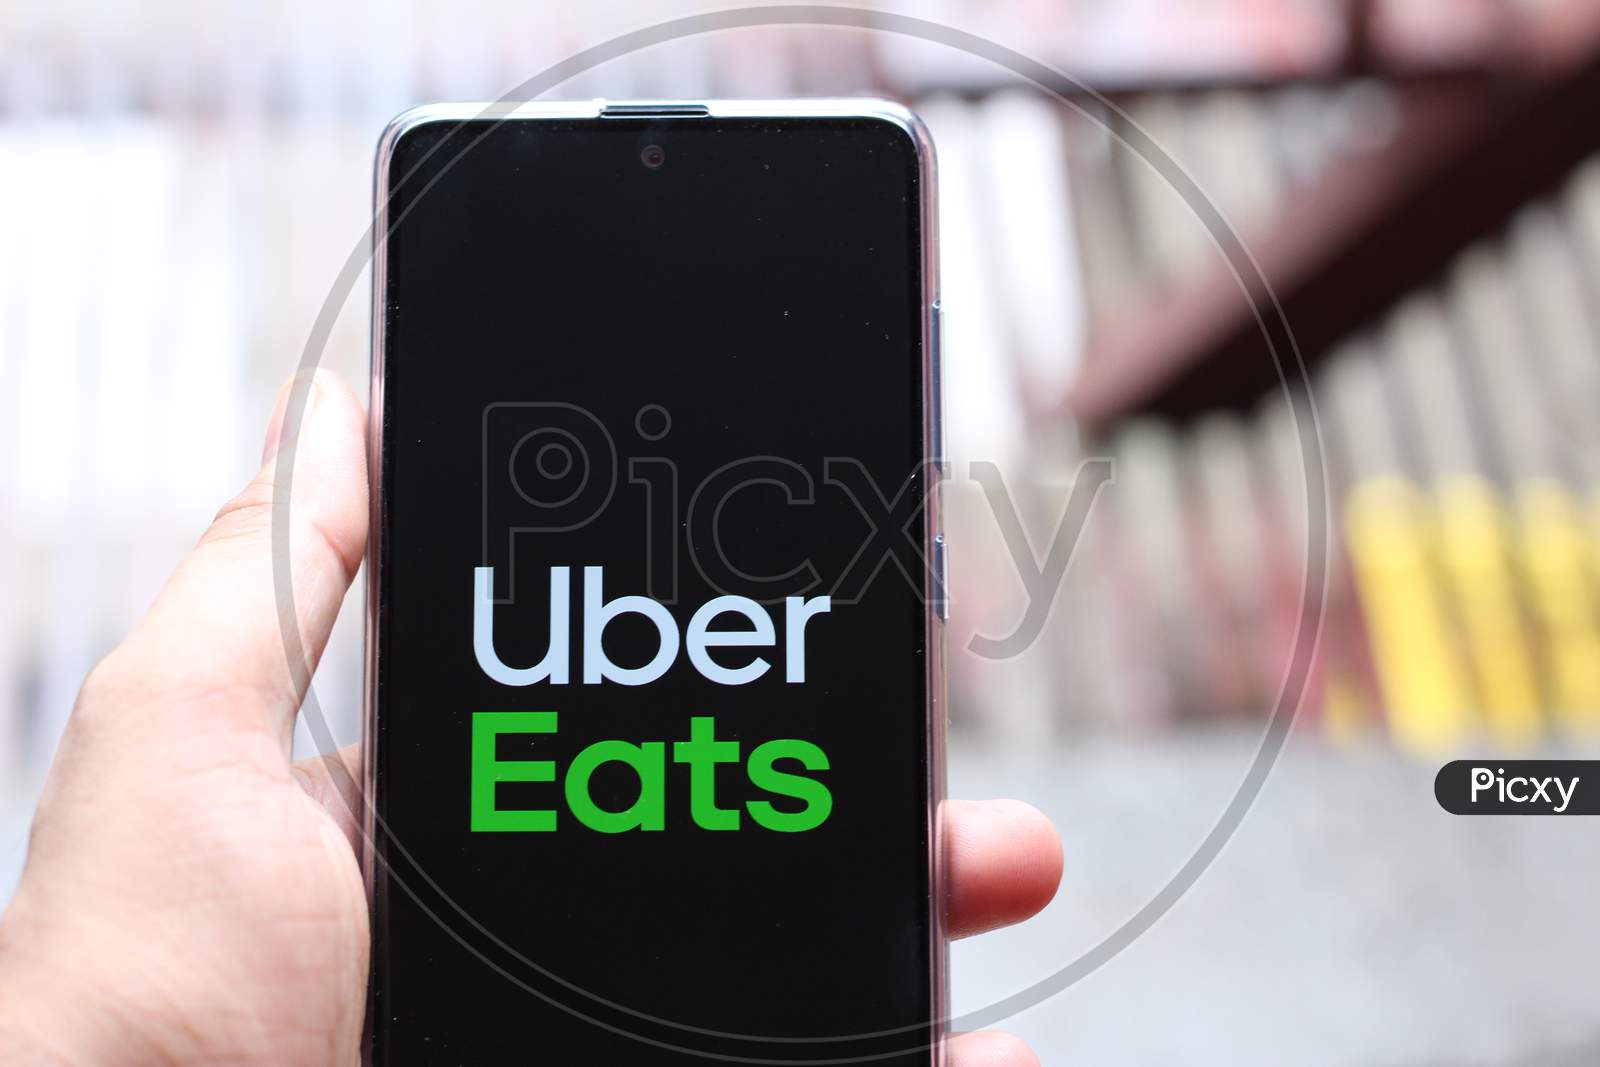 Uber eats application on smartphone with blurry background.